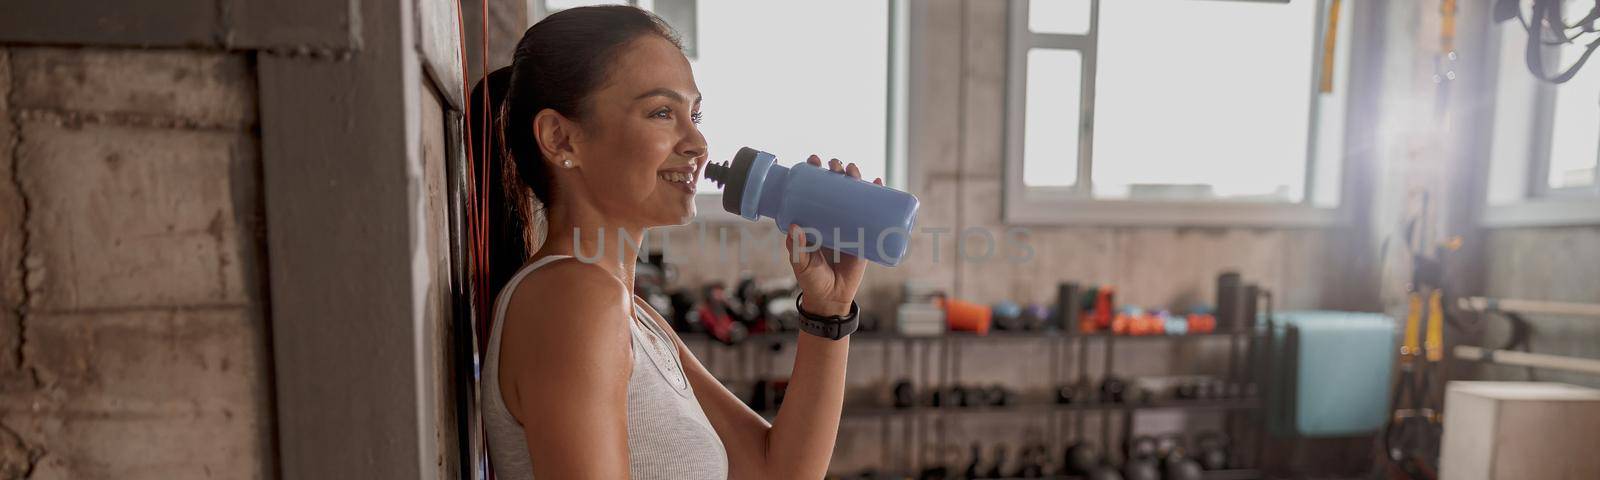 Happy lady leaning against wall at the sport club, hand on thigh, drinking water looking aside